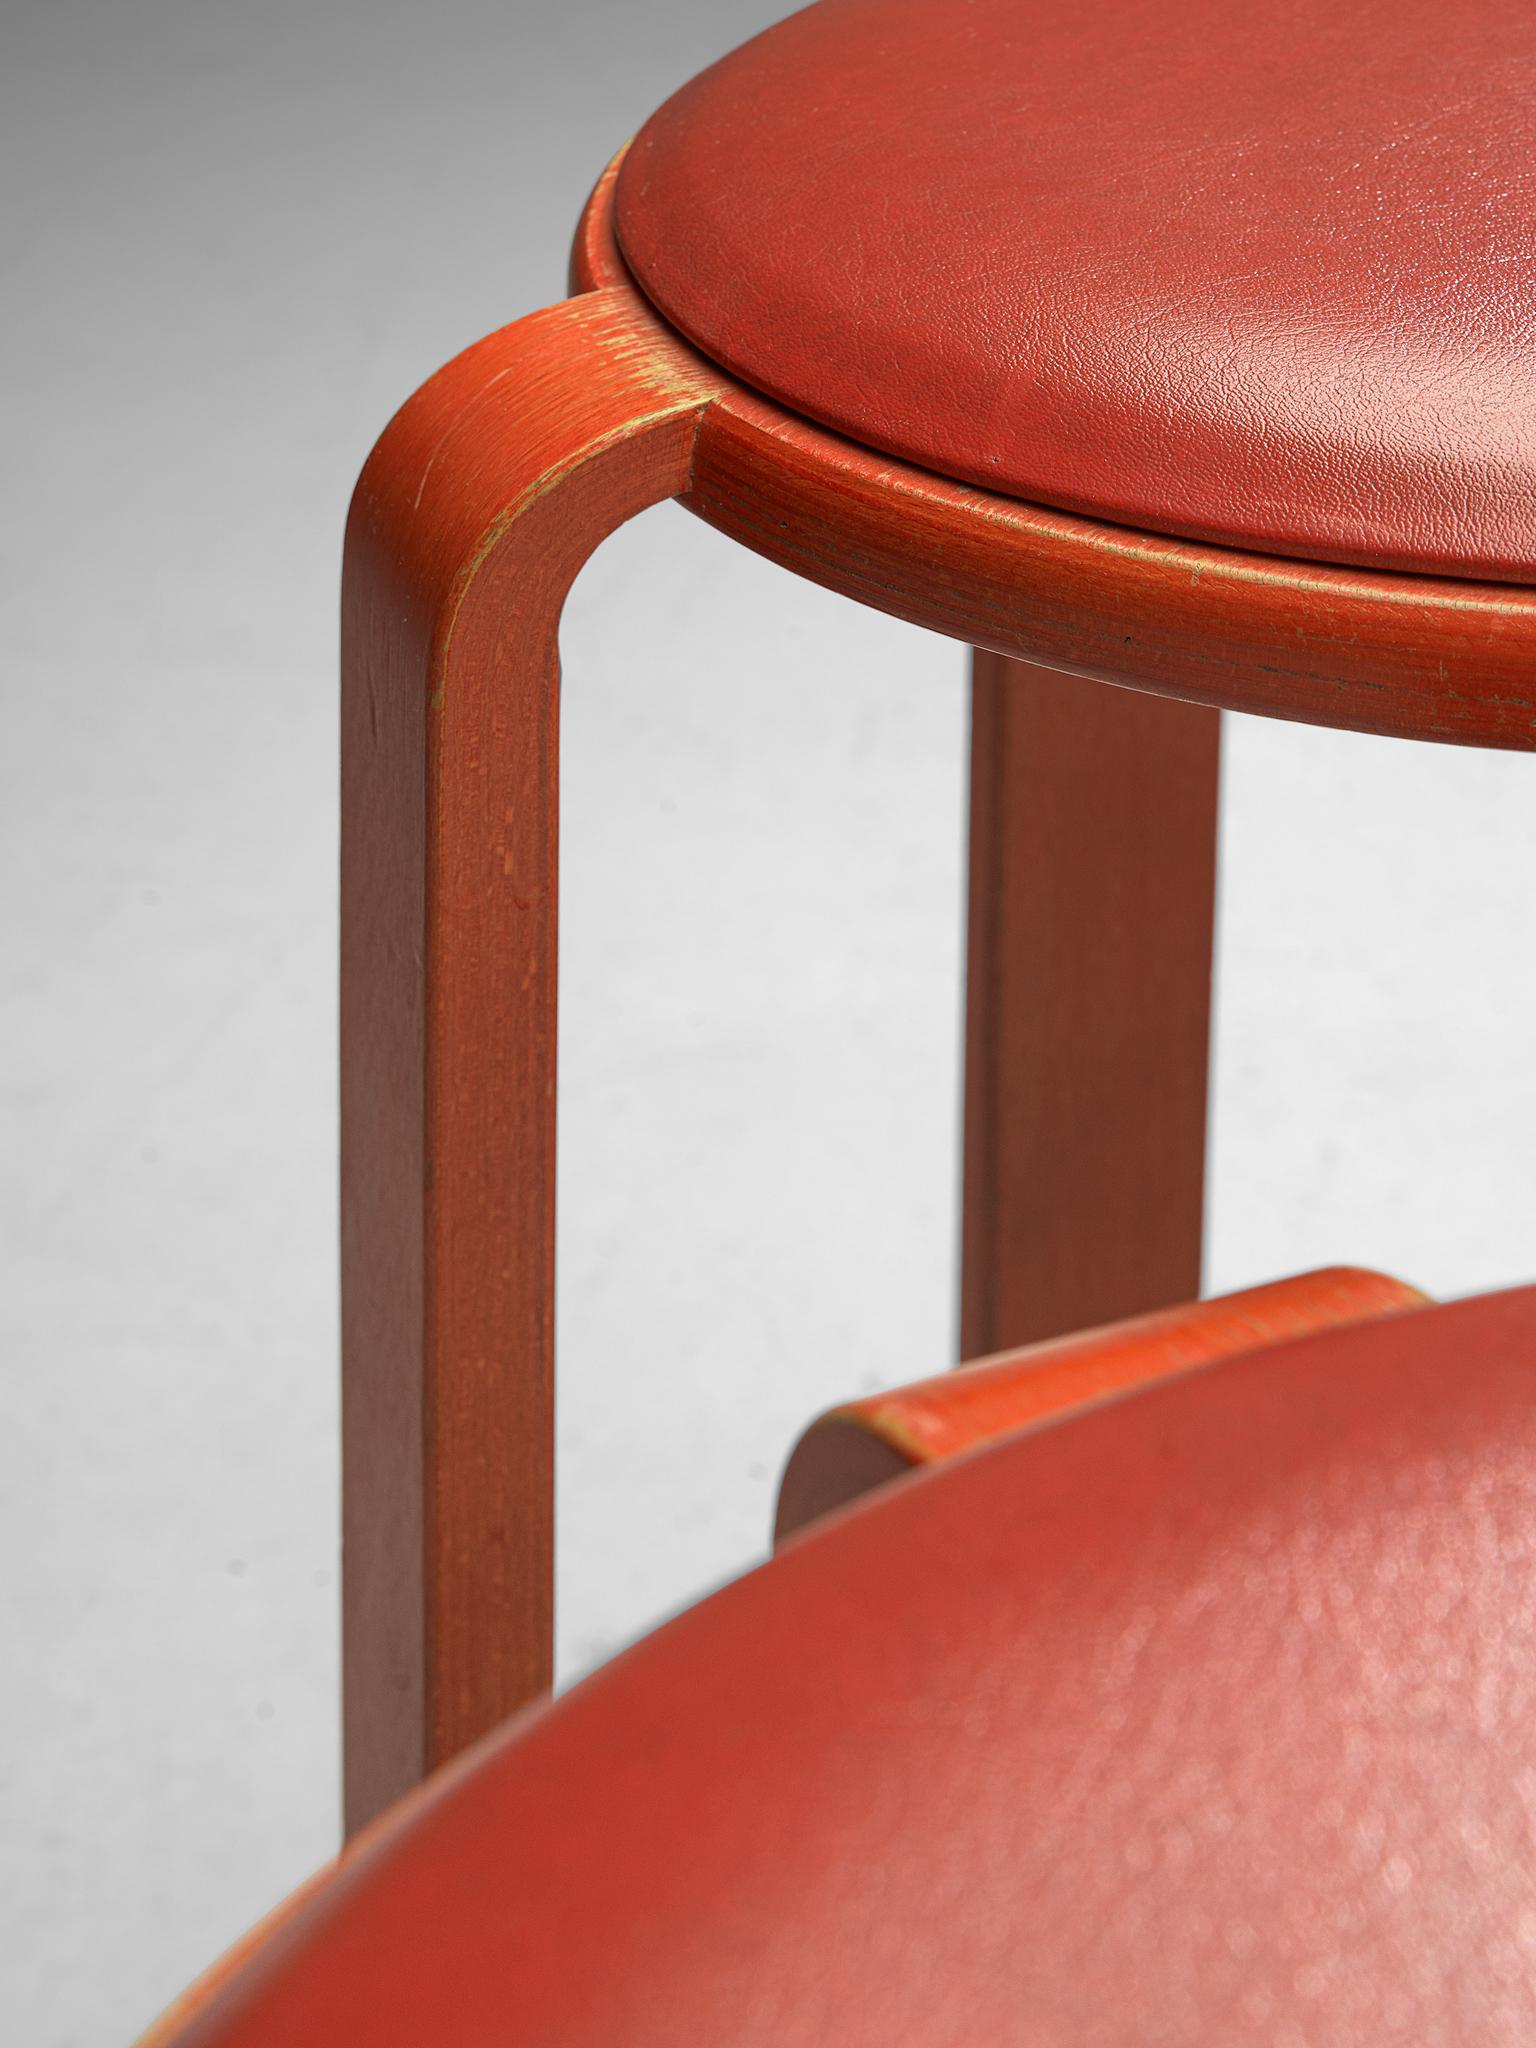 Bruno Rey for Dietiker, set of eight barstools, plywood, aluminum and leather, Switzerland, 1970s

A set of 8 modernist barstools by Bruno Rey and produced by Dietiker. The stools are made of red lacquered wood and the padded seat is finished with